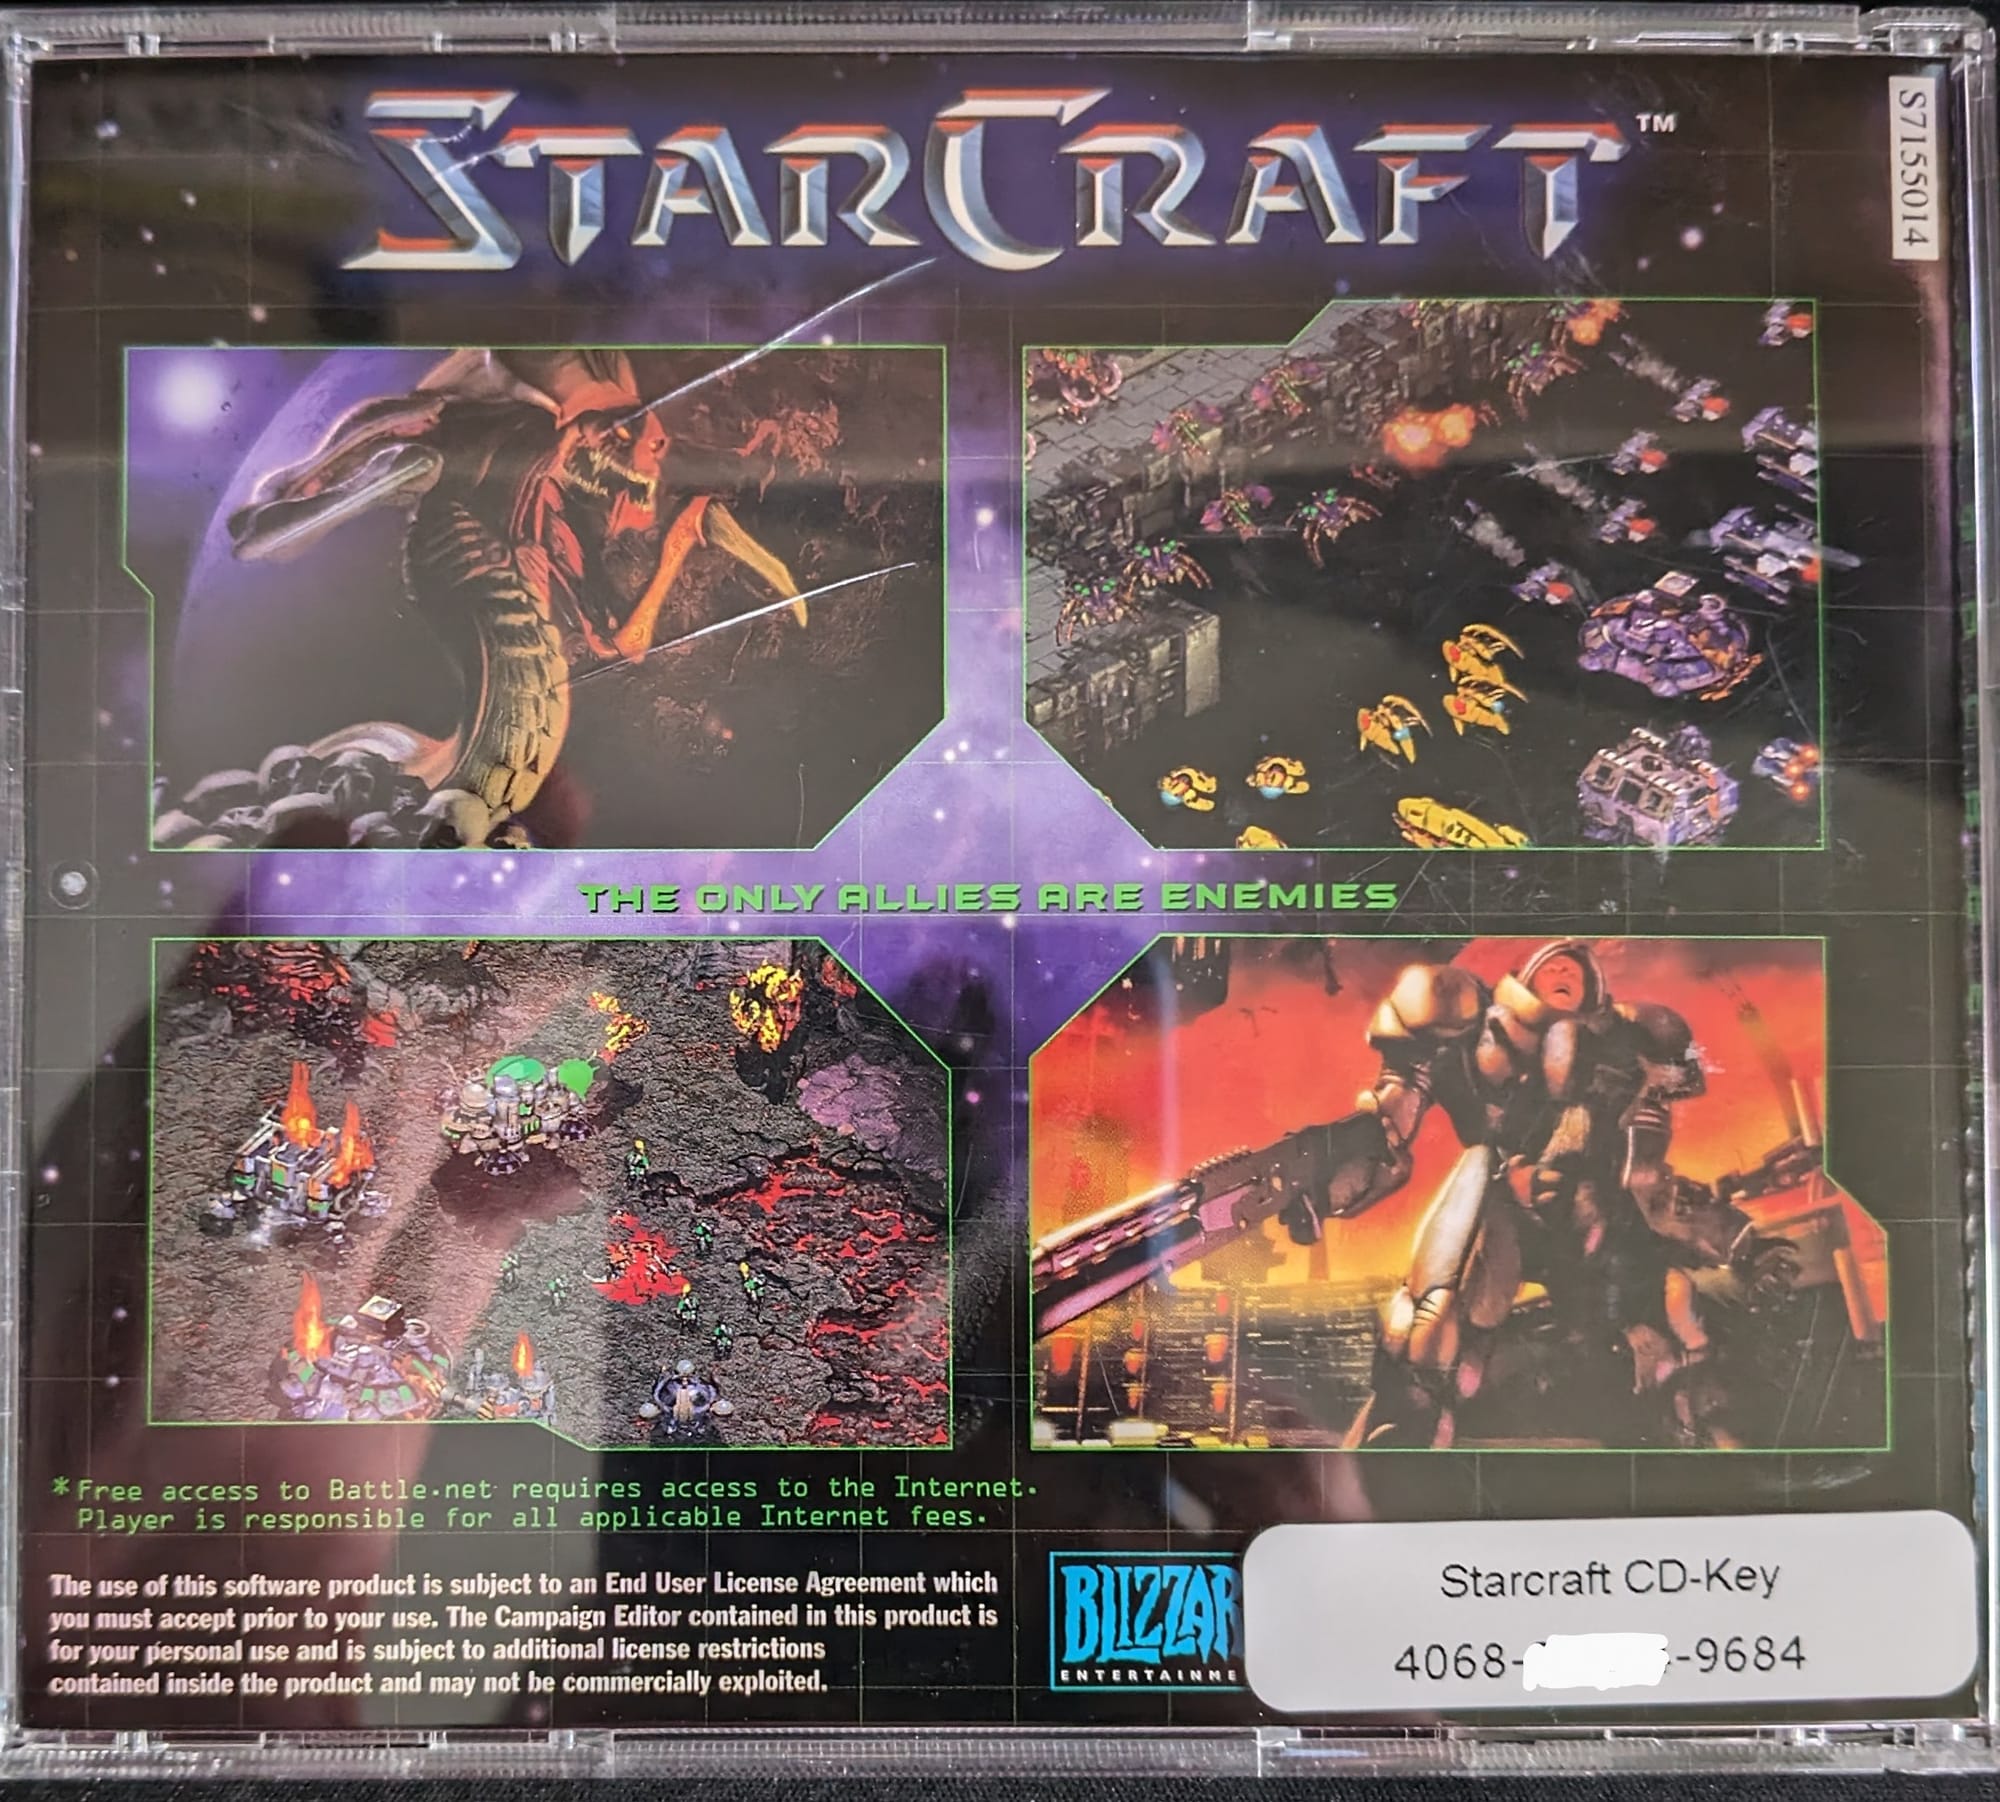 Rear of a StarCraft CD case showing off the CD-Key activation code